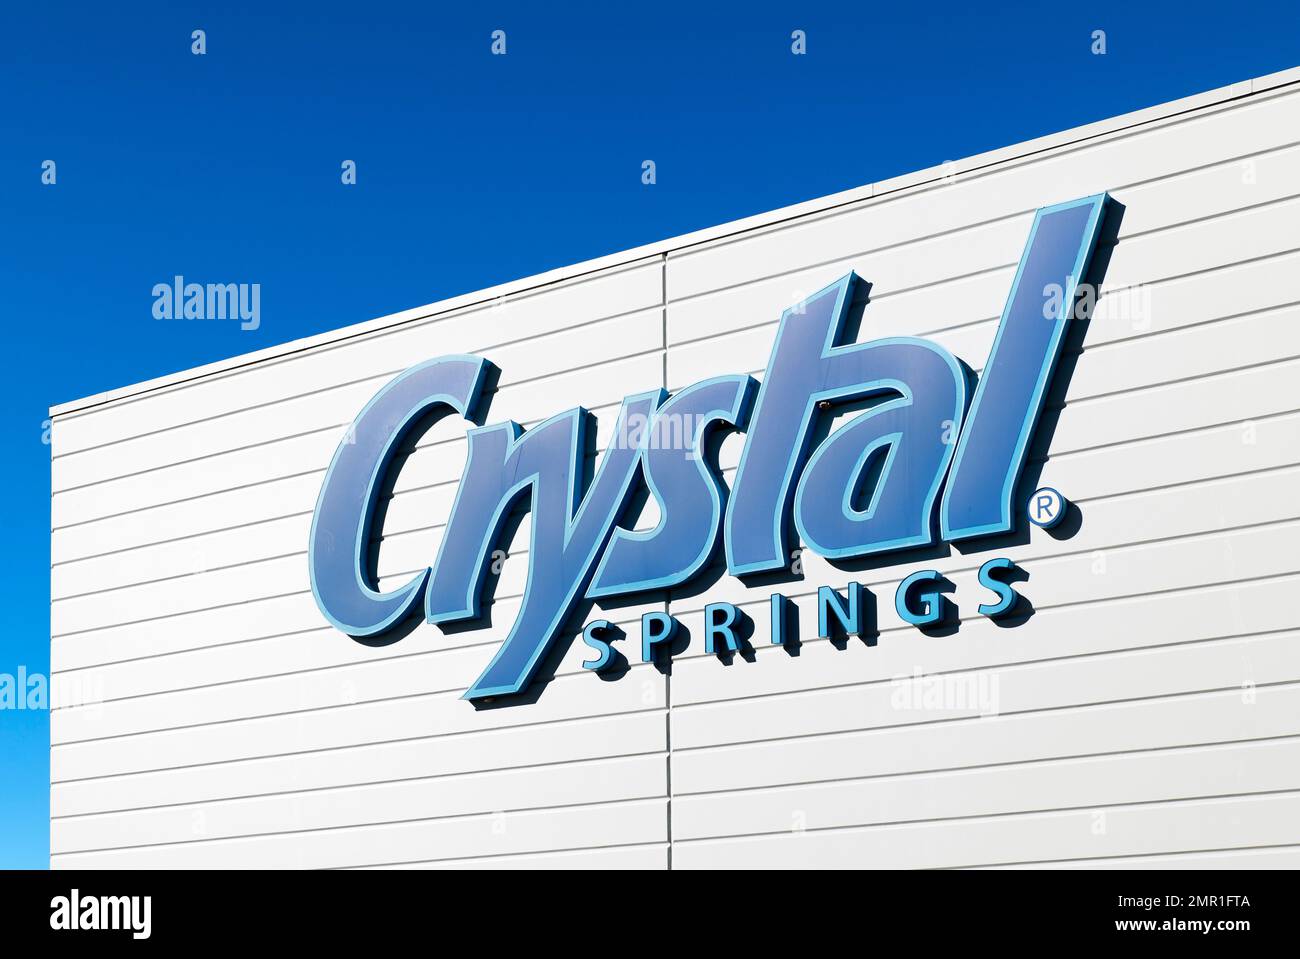 Crystal Springs drinking water distribution warehouse. Stock Photo